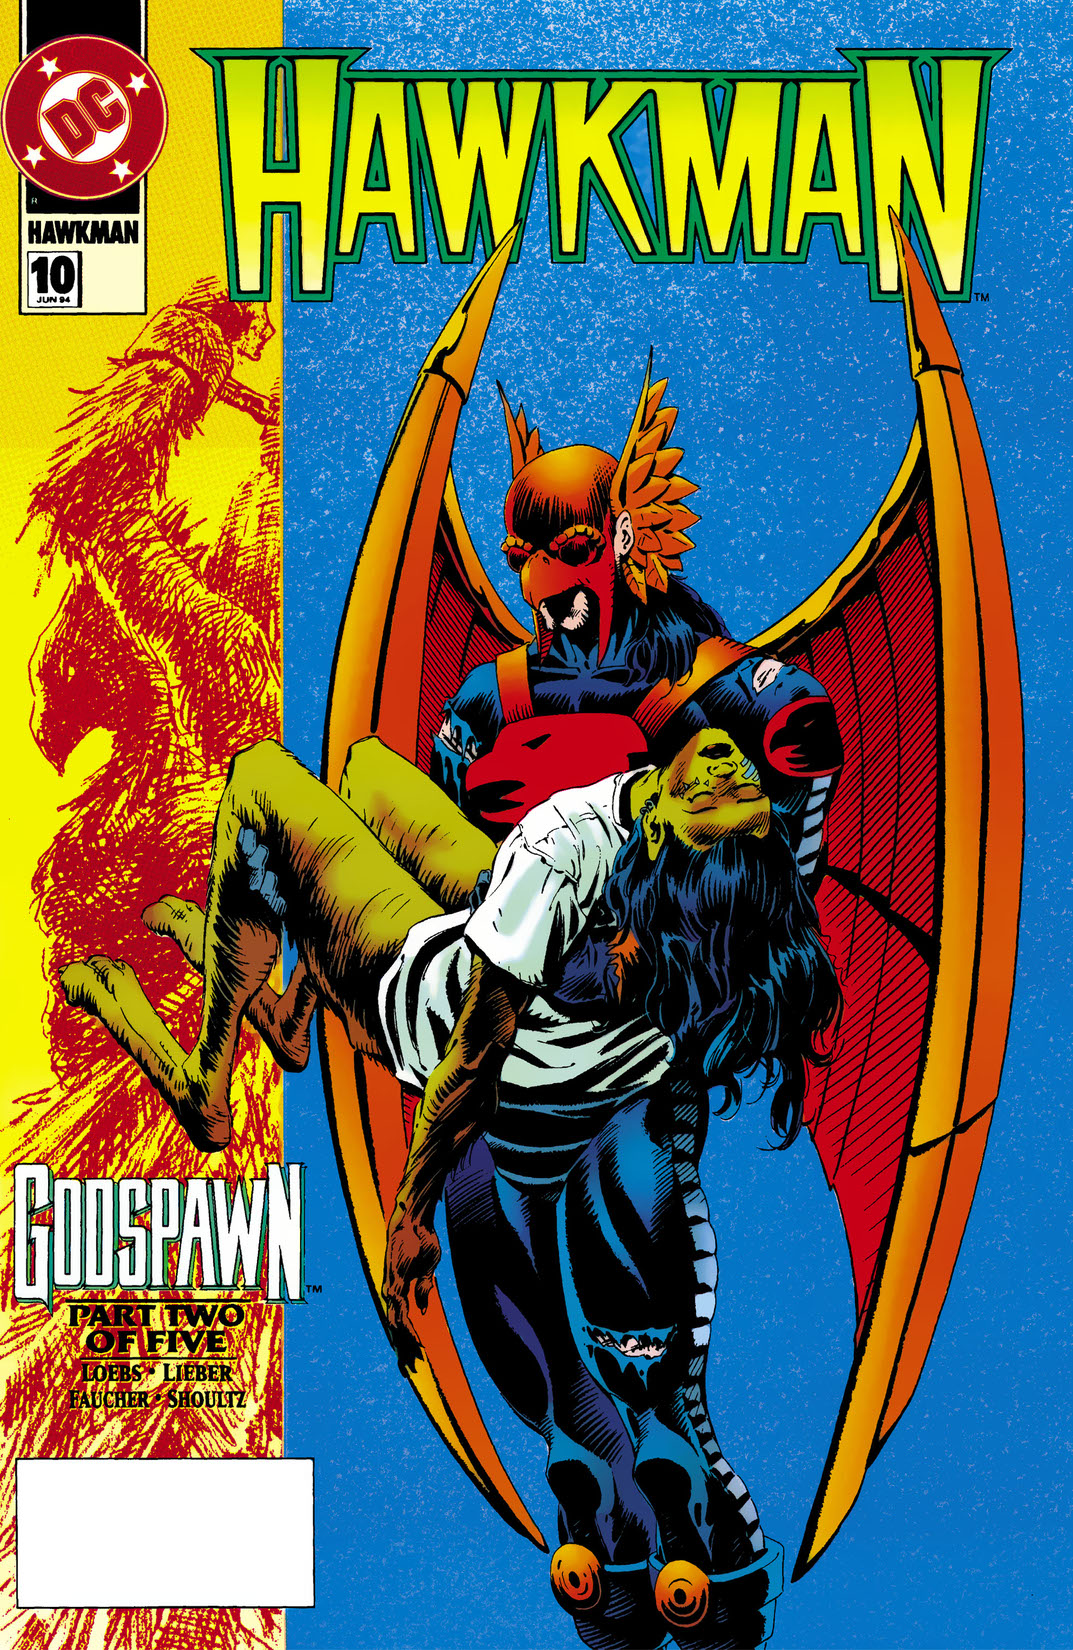 Hawkman (1993-) #10 preview images